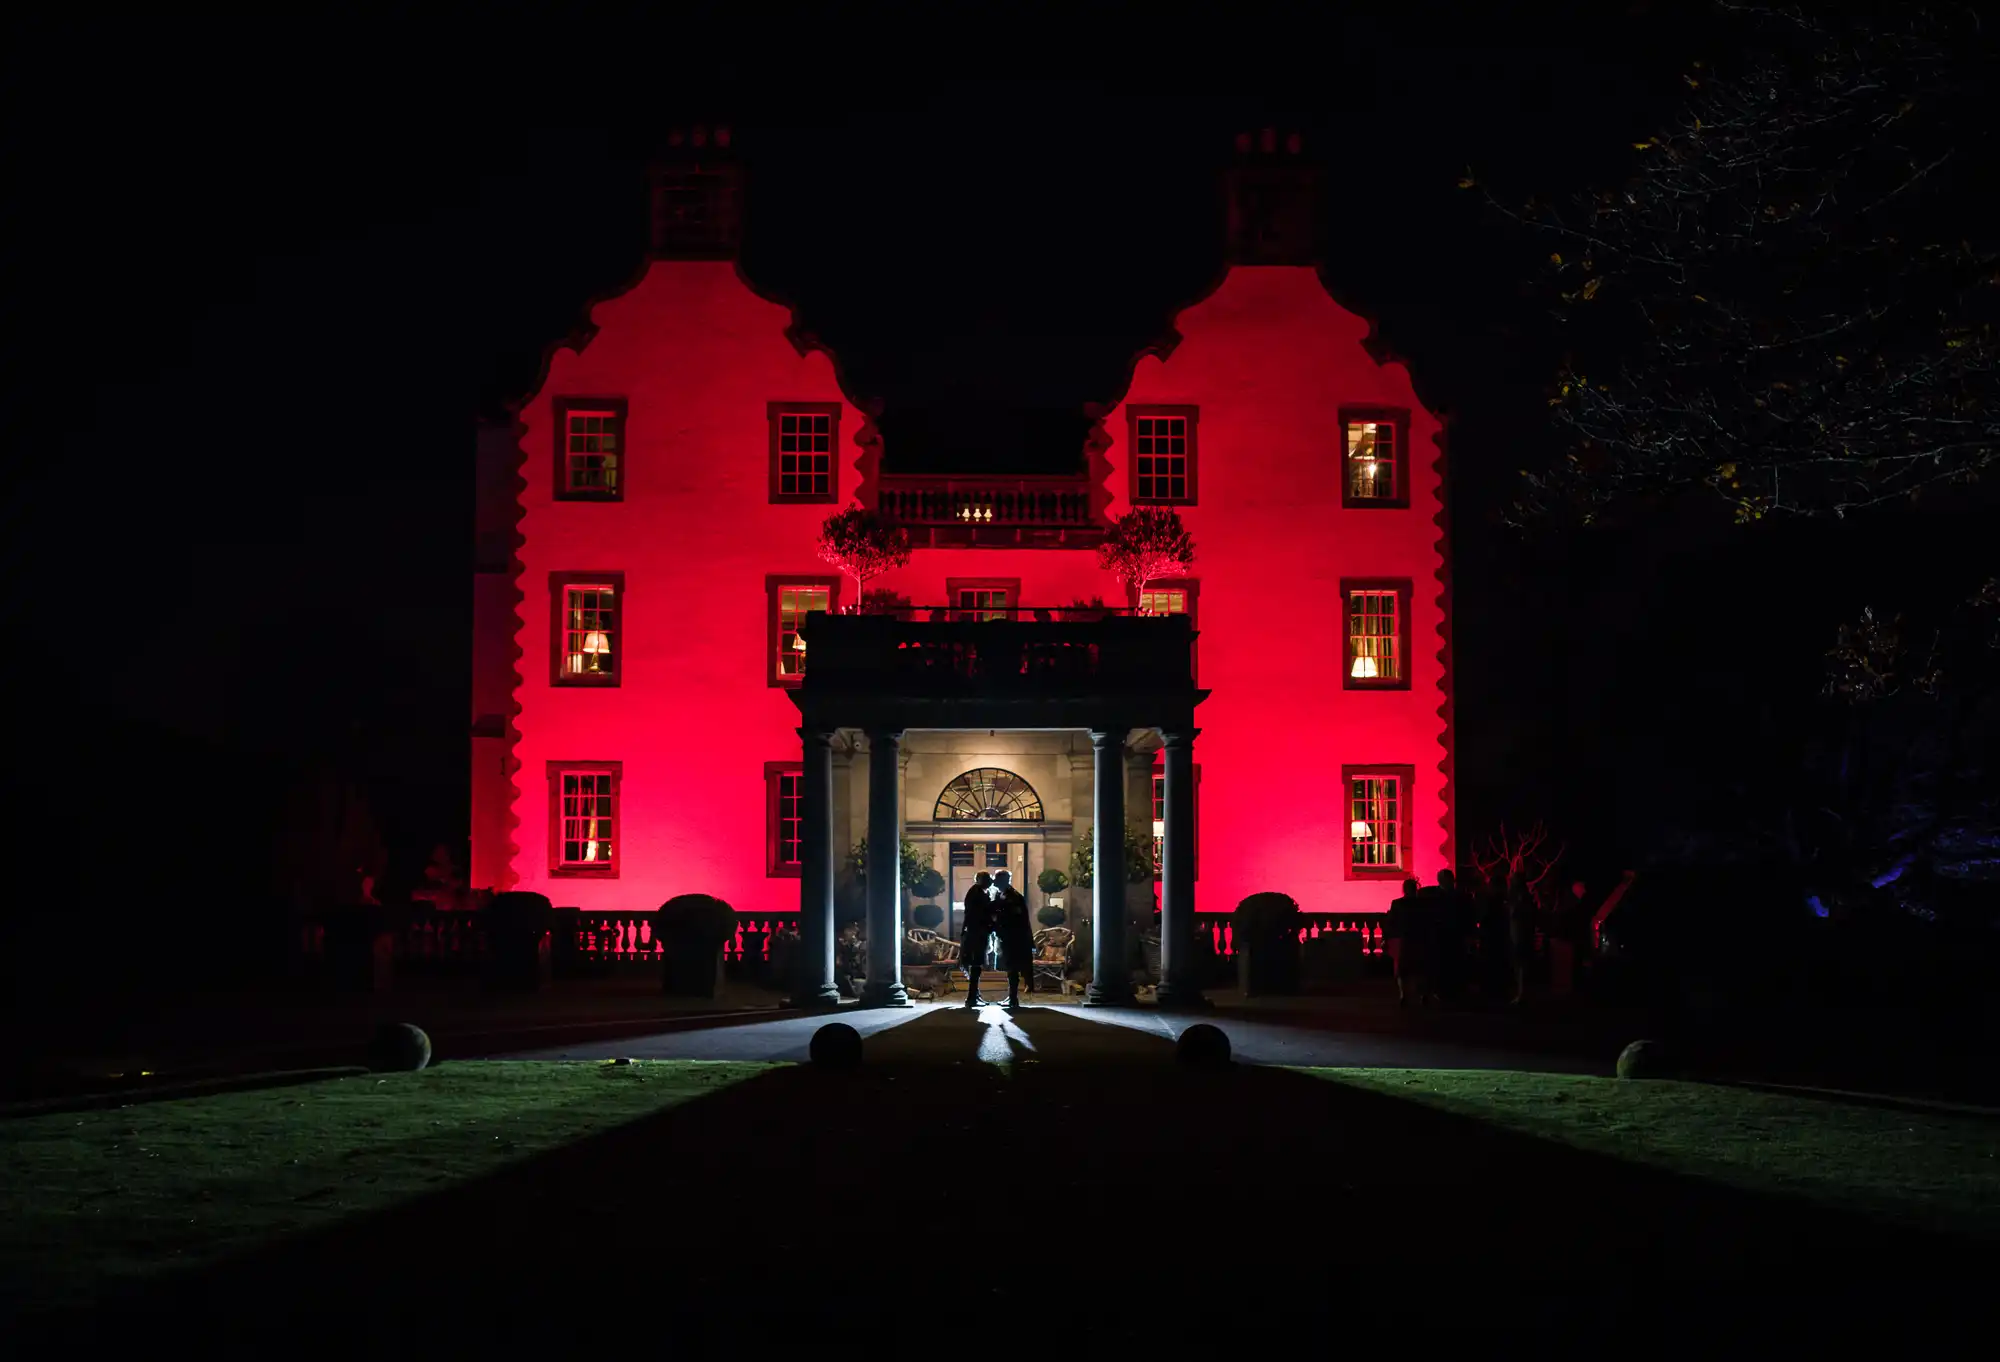 A newlywed couple stands in front of a large building with red-lit walls and illuminated windows at night.